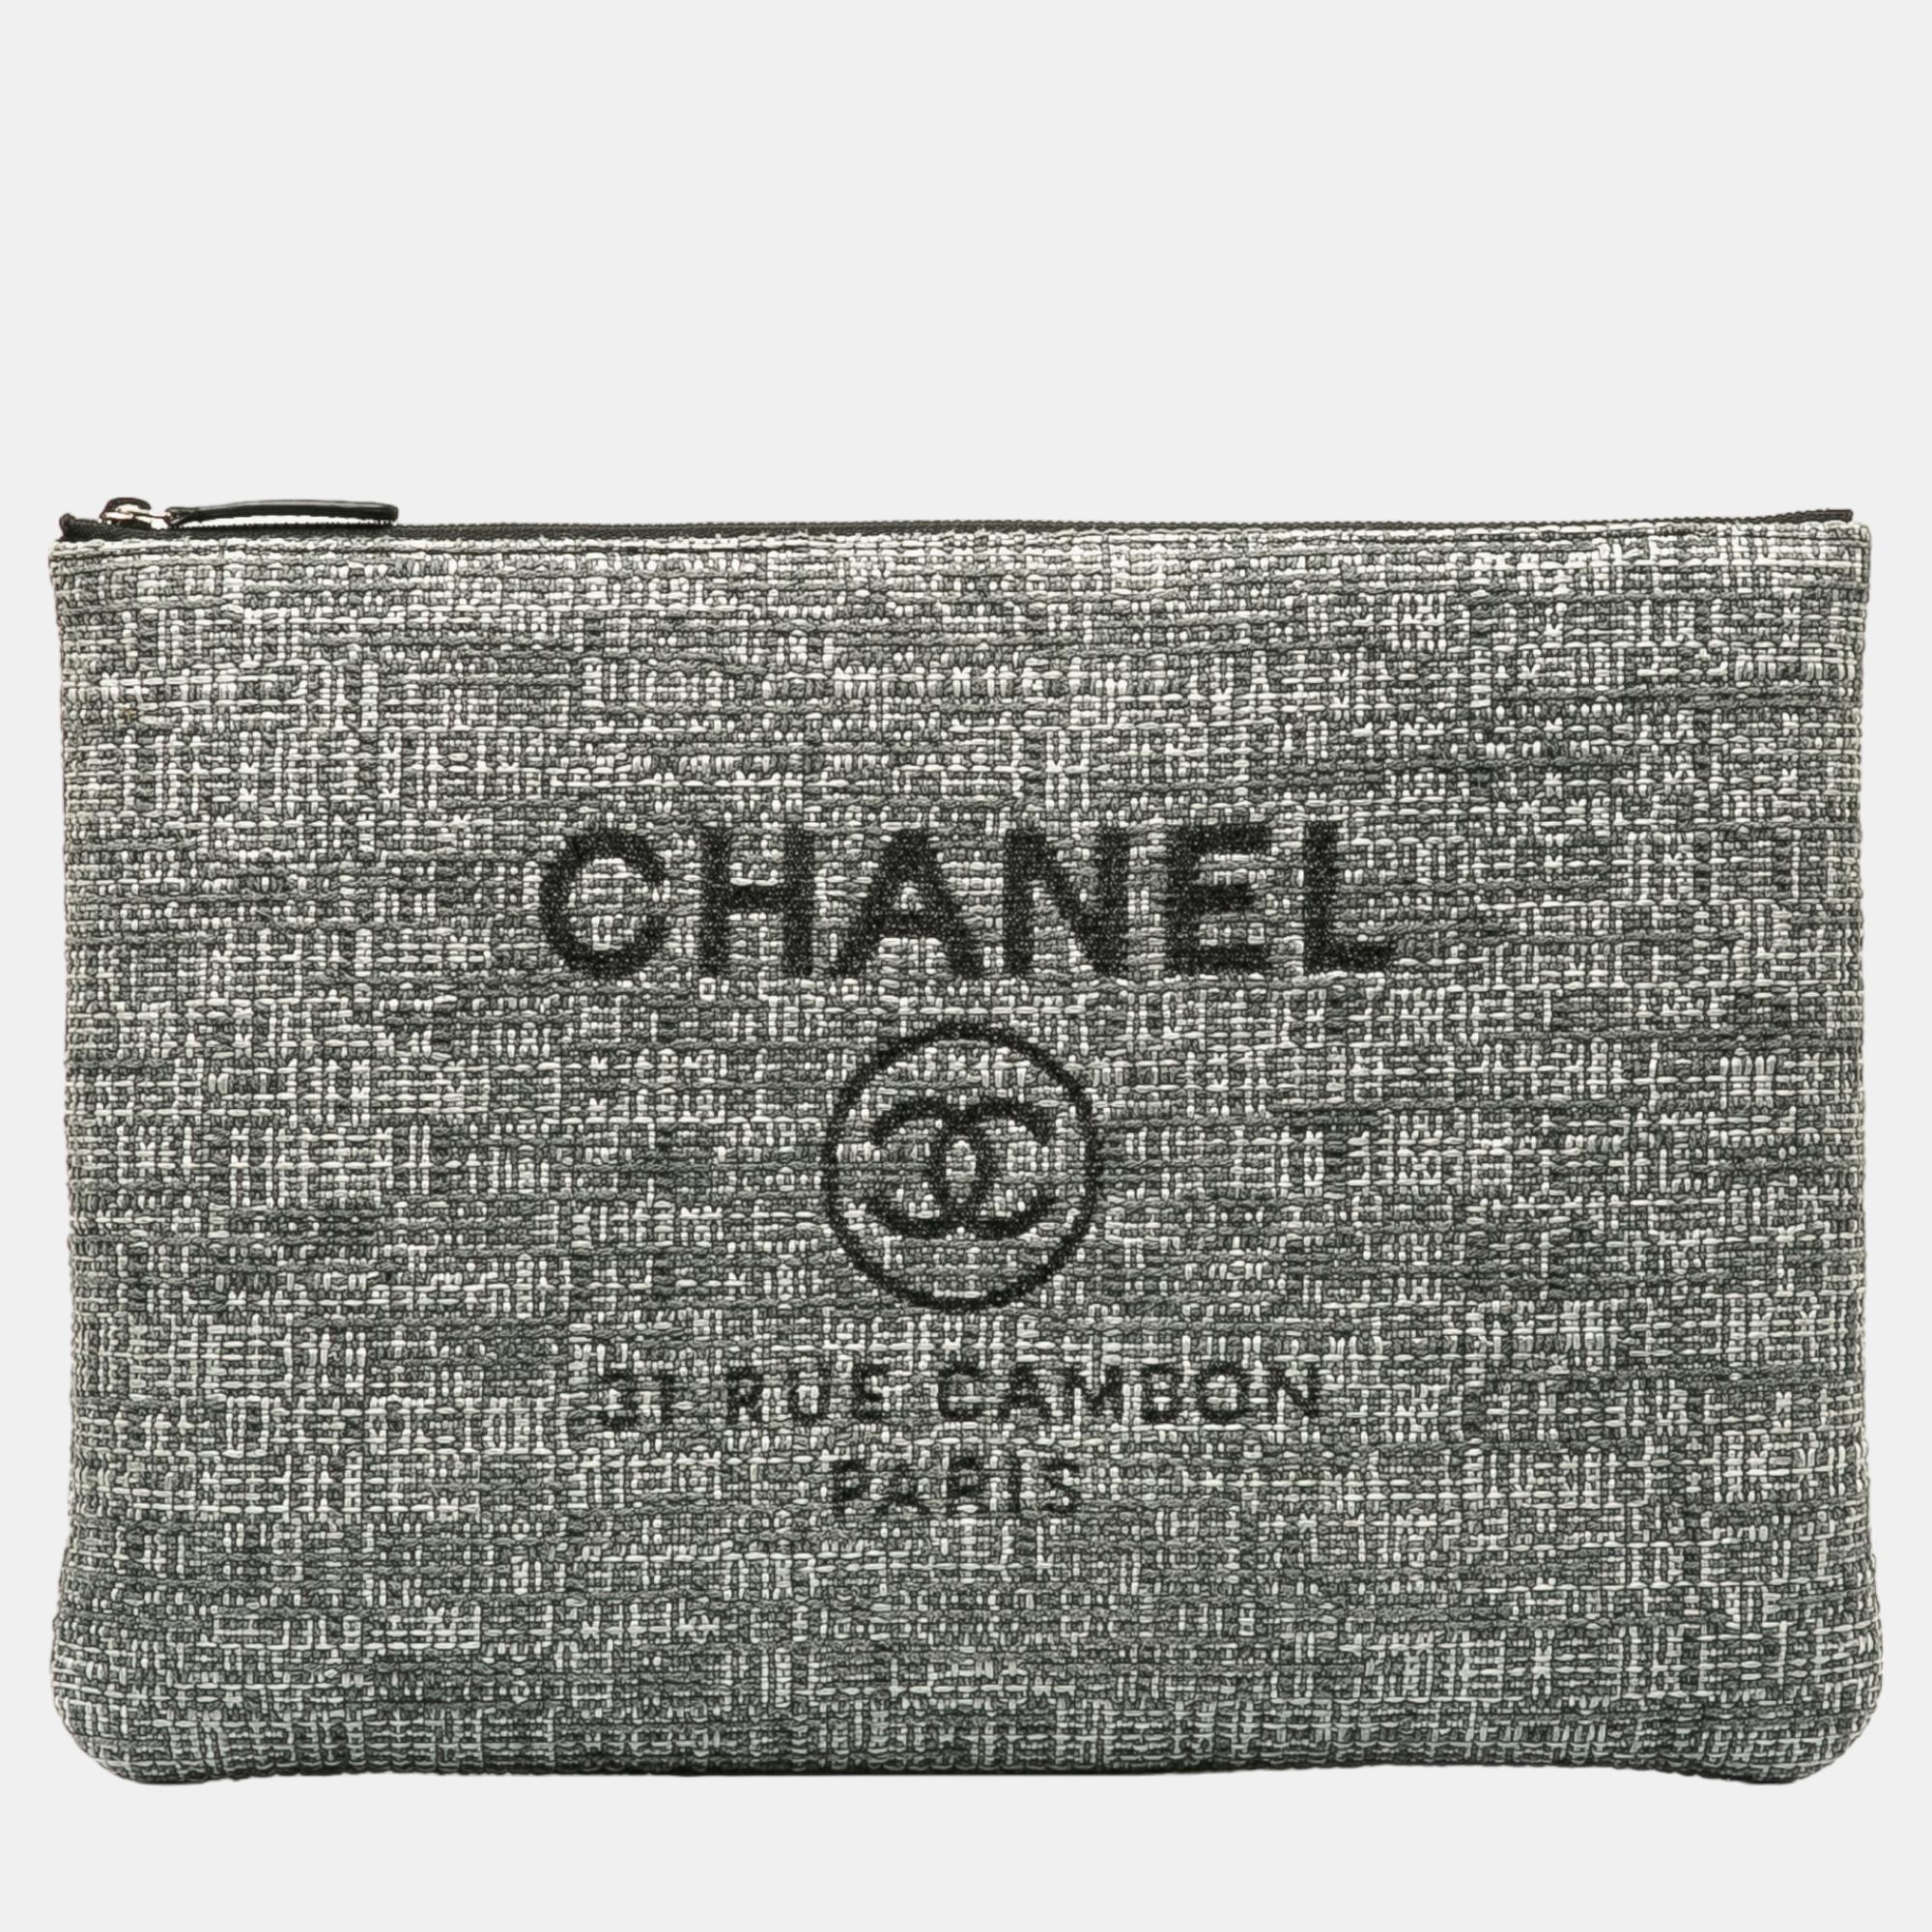 Chanel grey deauville o case